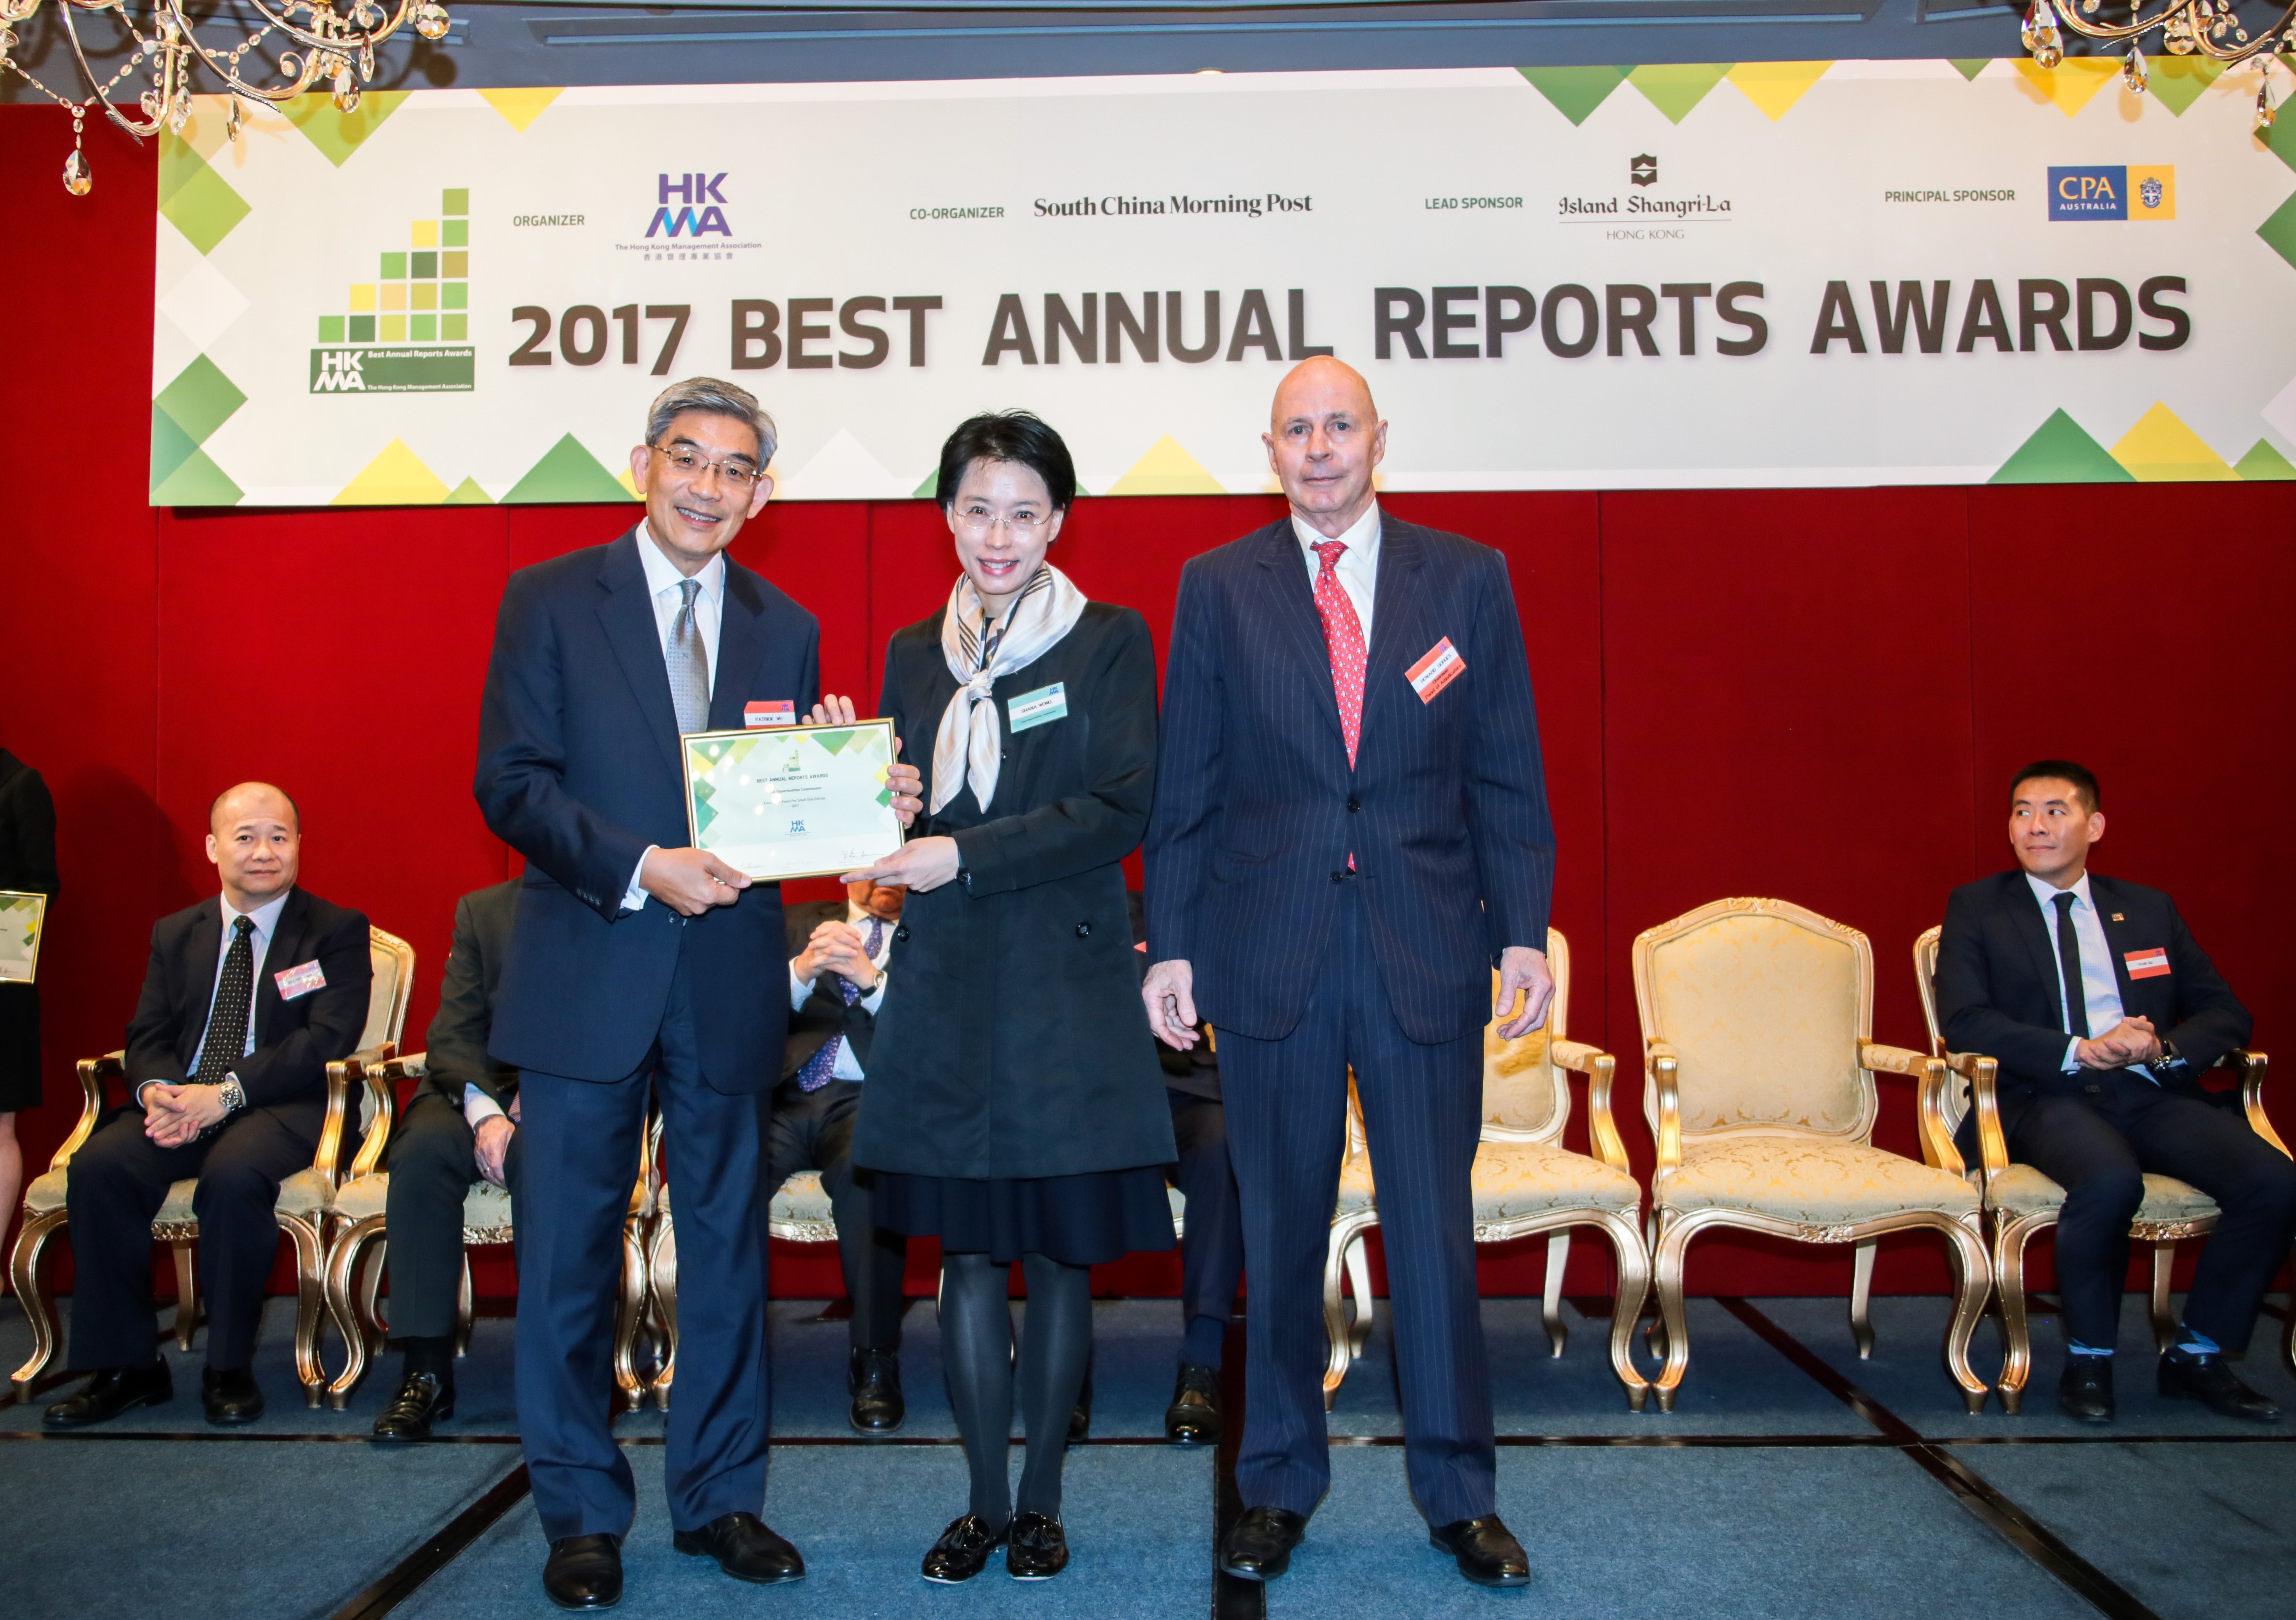 EOC representative received the HKMA Best Annual Reports Awards at the award presentation ceremony